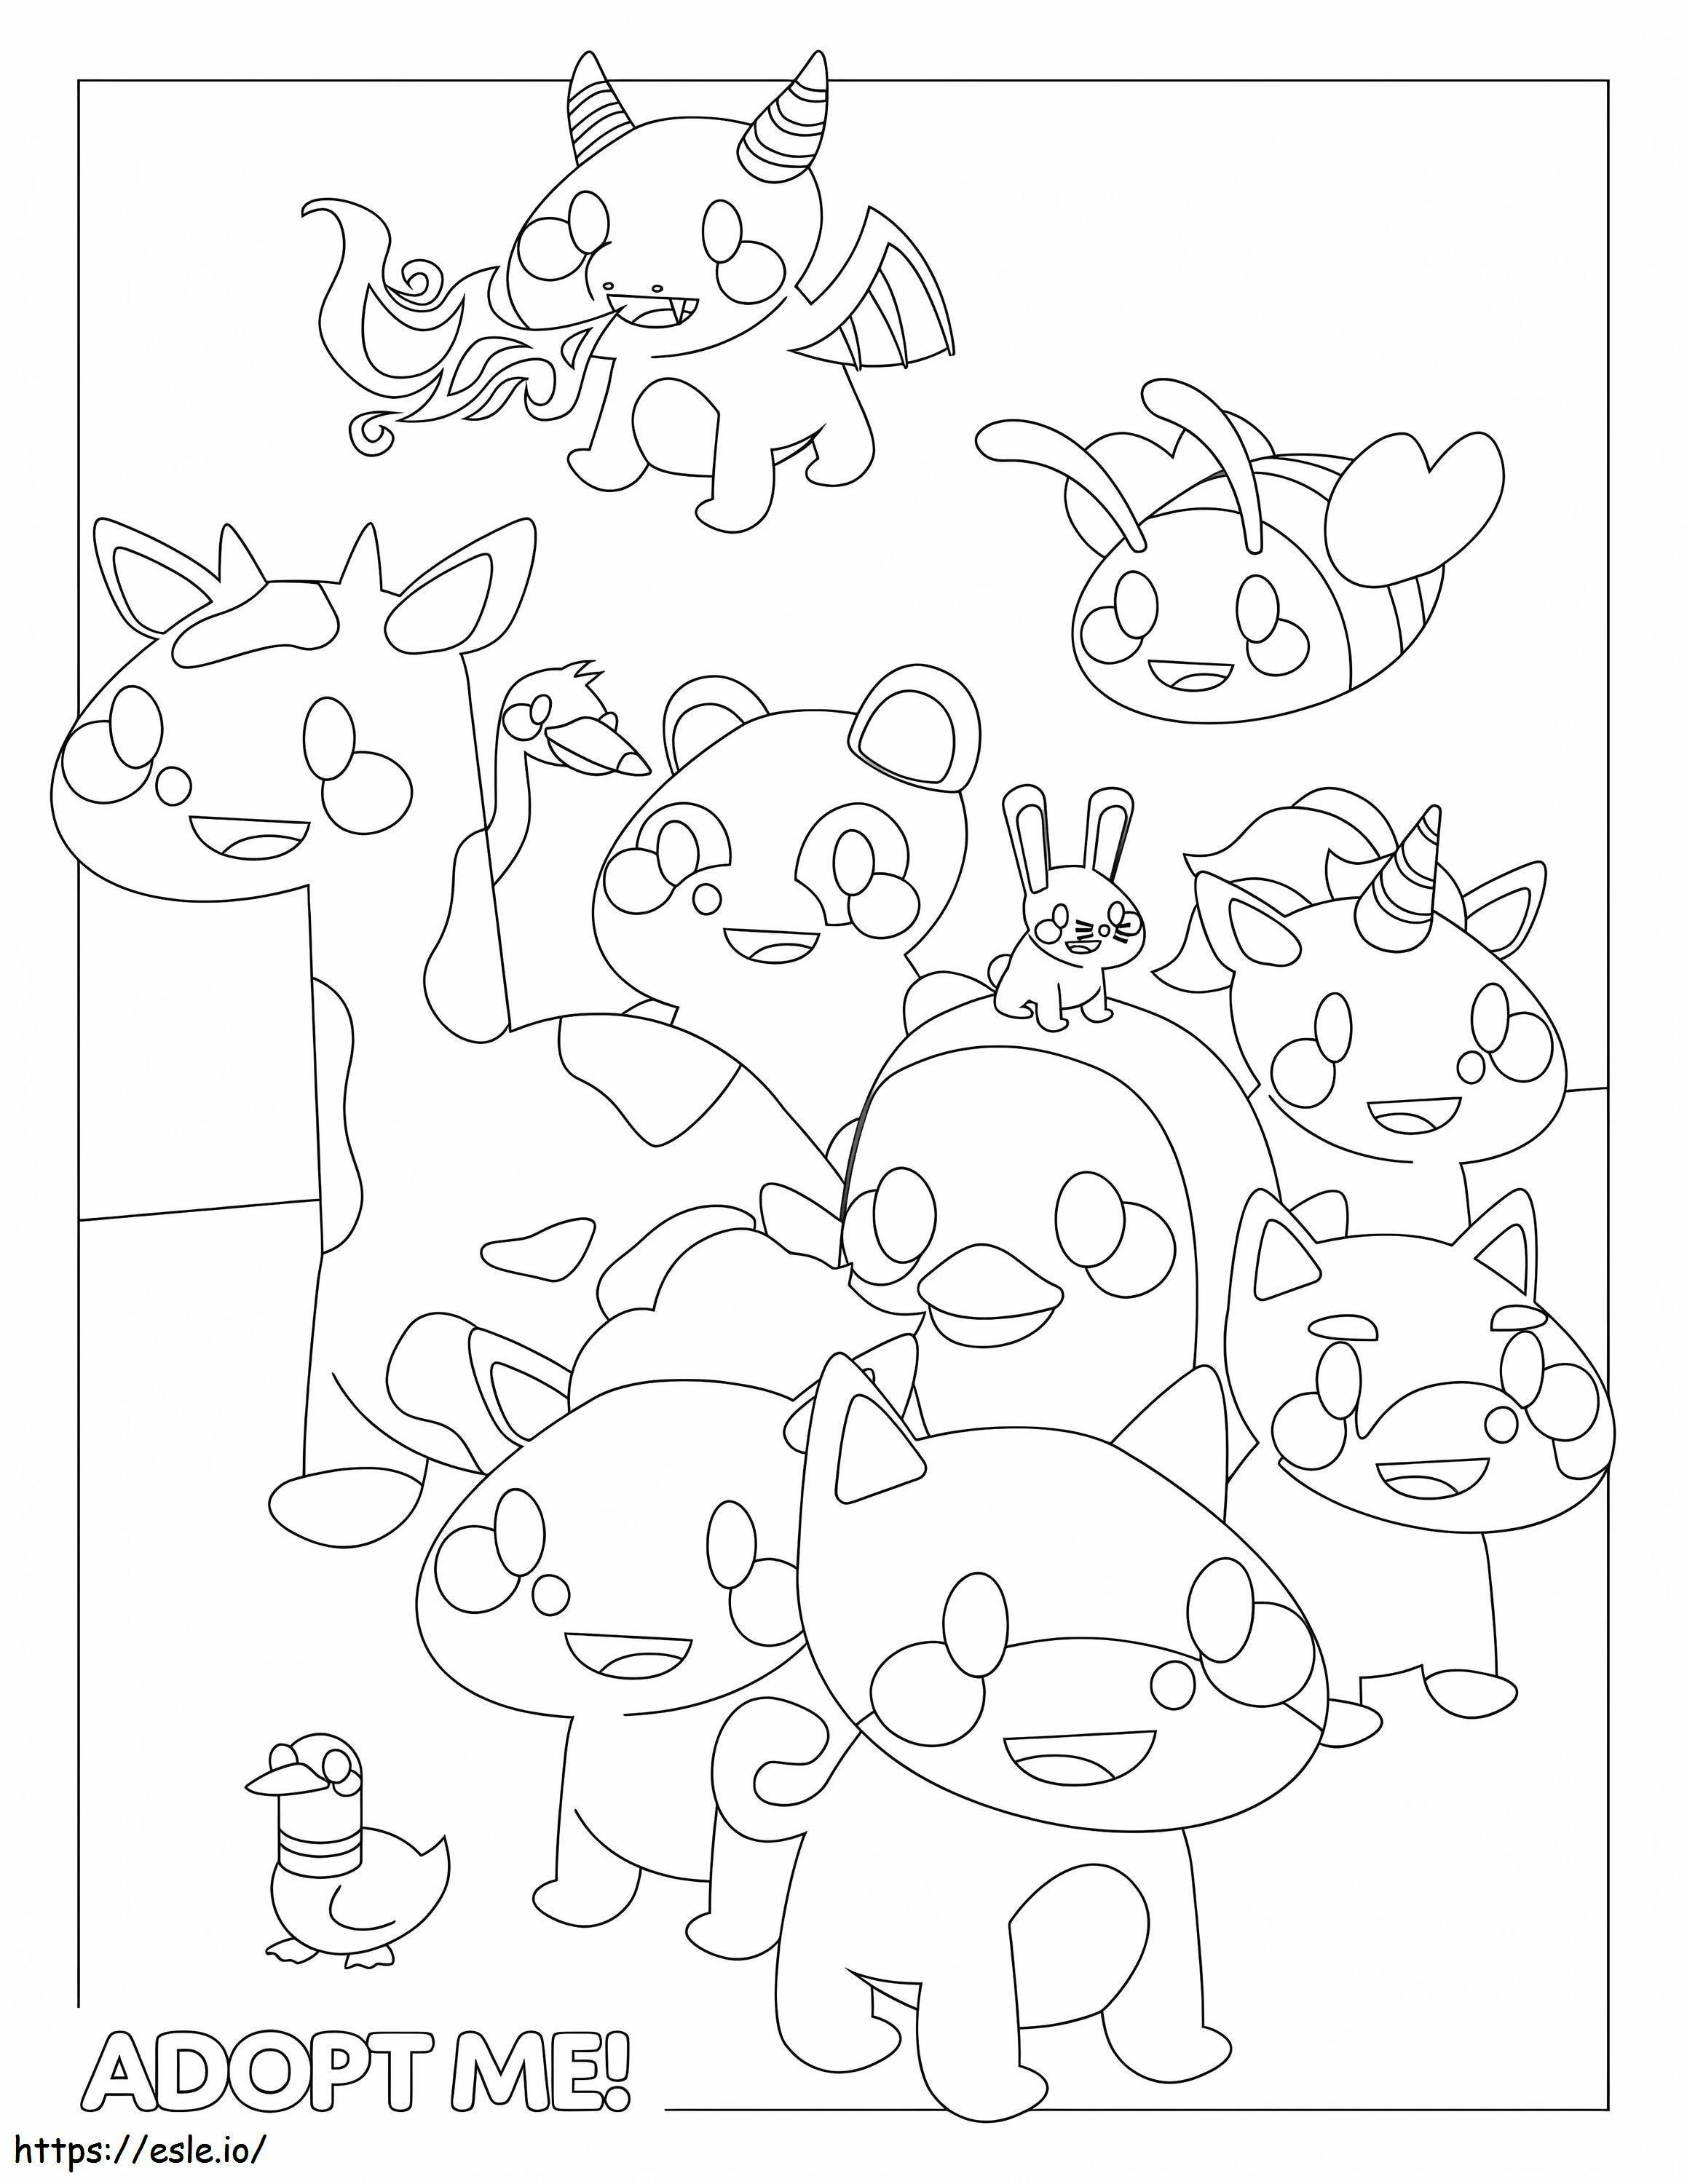 Funny Adopt Me coloring page